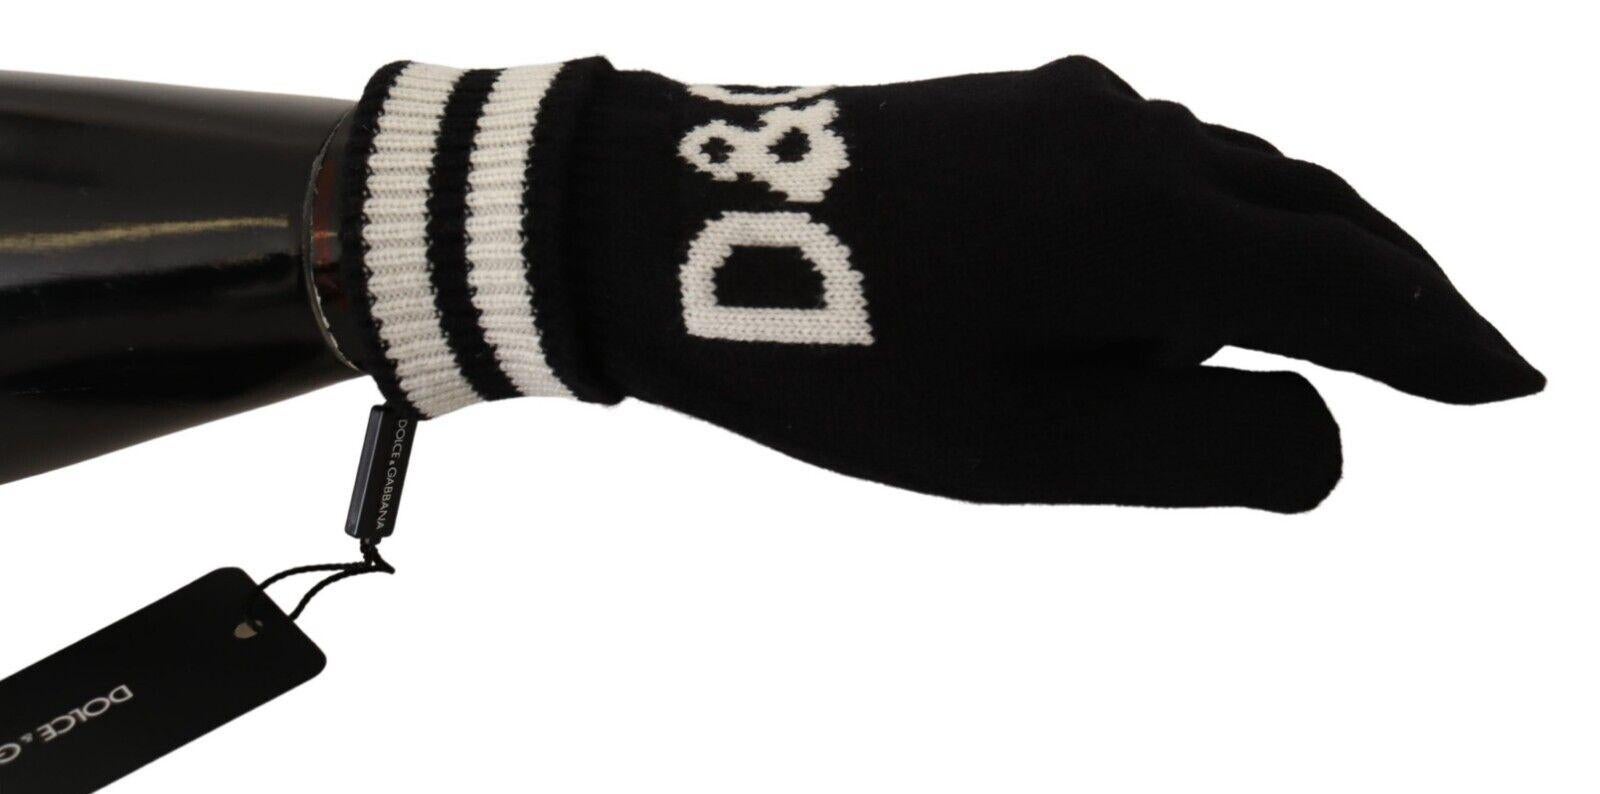 DOLCE & GABBANA

Gorgeous brand new with tags, 100% Authentic Dolce & Gabbana Black gloves. Made of cashmere. Embellished with knitted D&G signature in white.

Model: Gloves
Color: Black, white

Logo detail

Made in Italy

Material: 100%